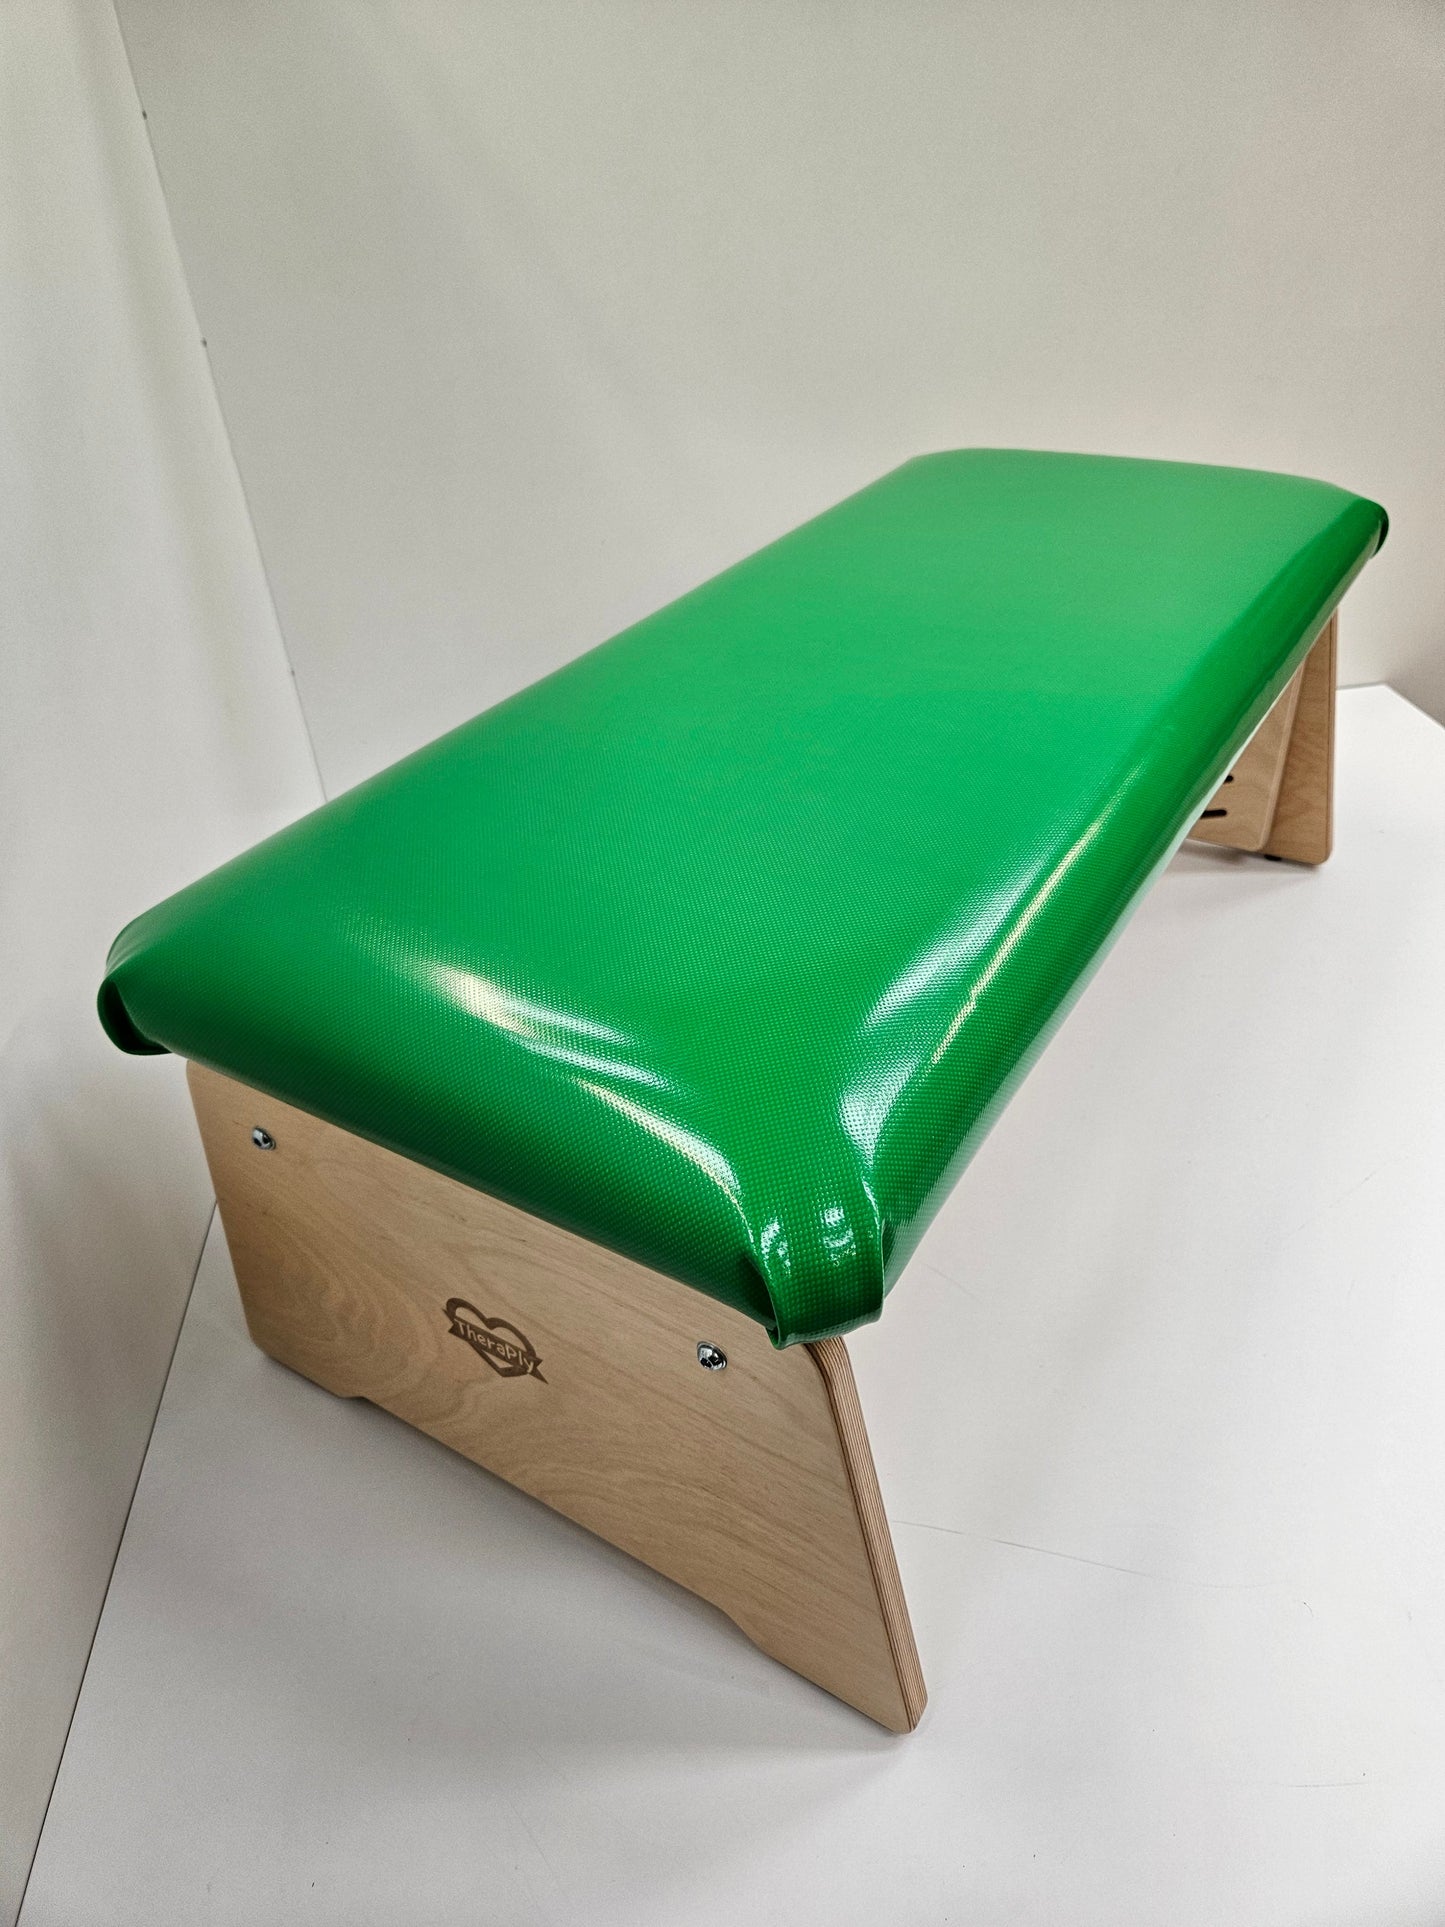 Green TheraPly therapy bench - small